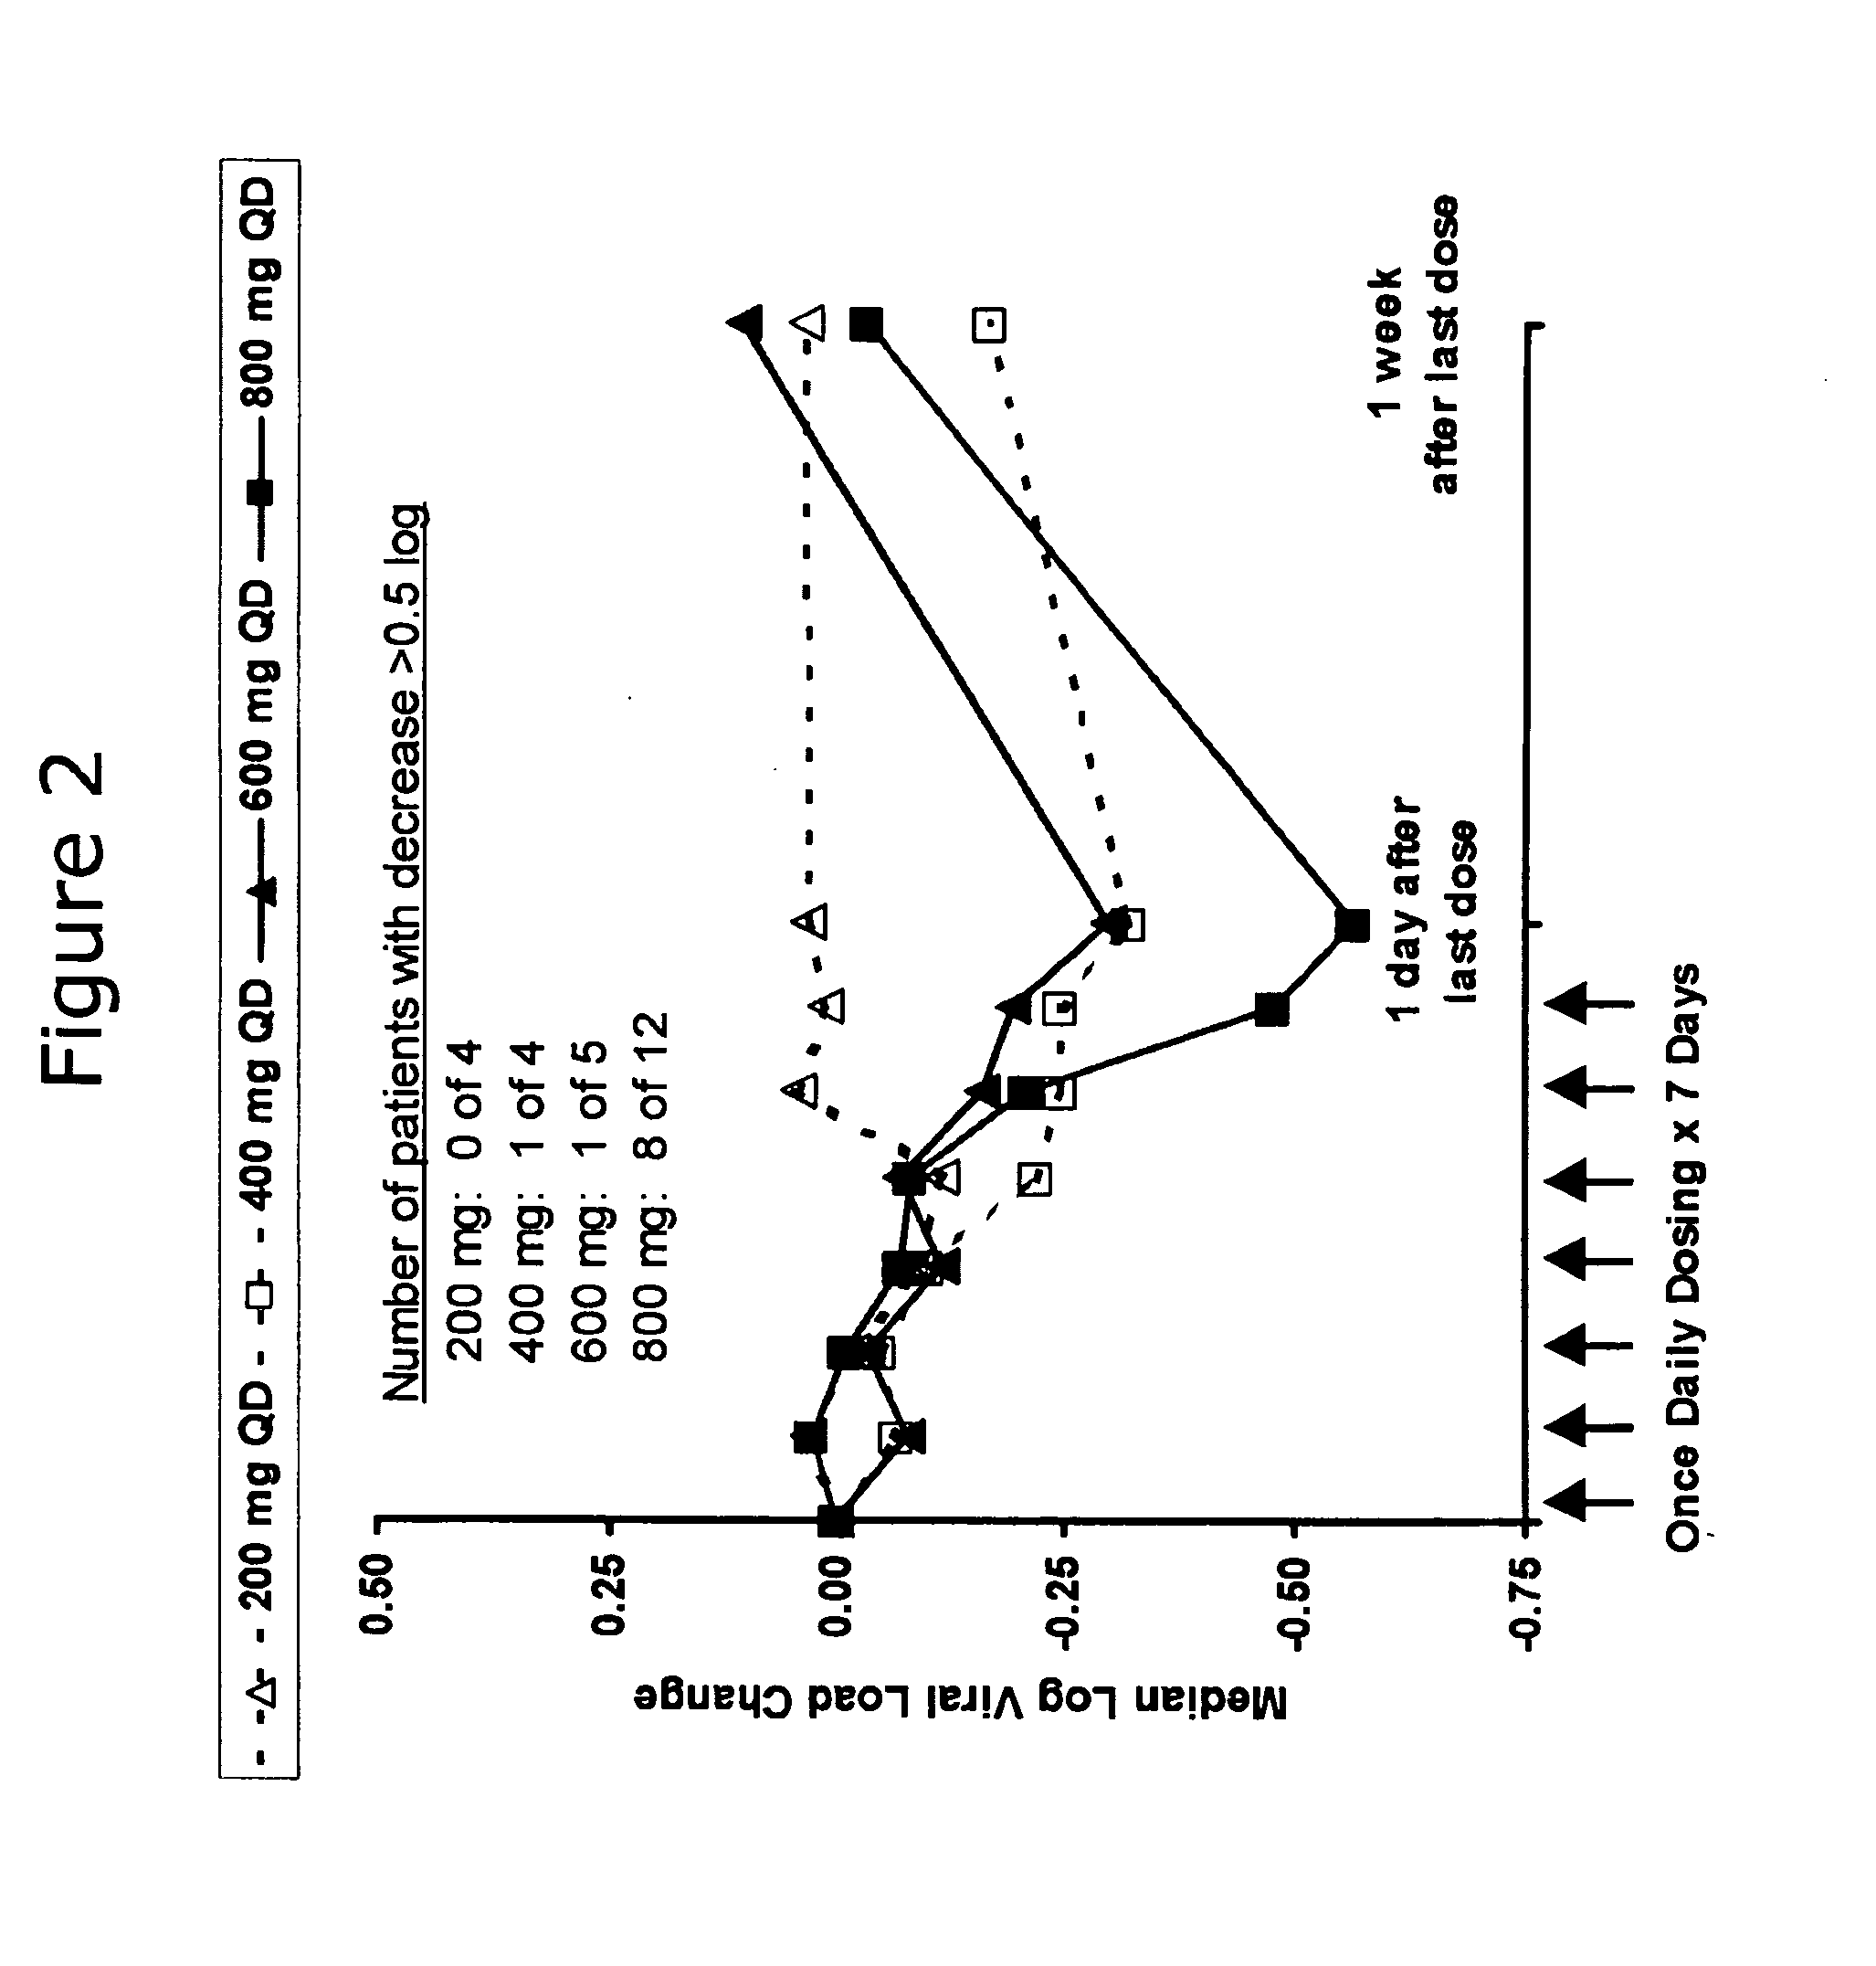 Administration of TLR7 ligands and prodrugs thereof for treatment of infection by hepatitis C virus